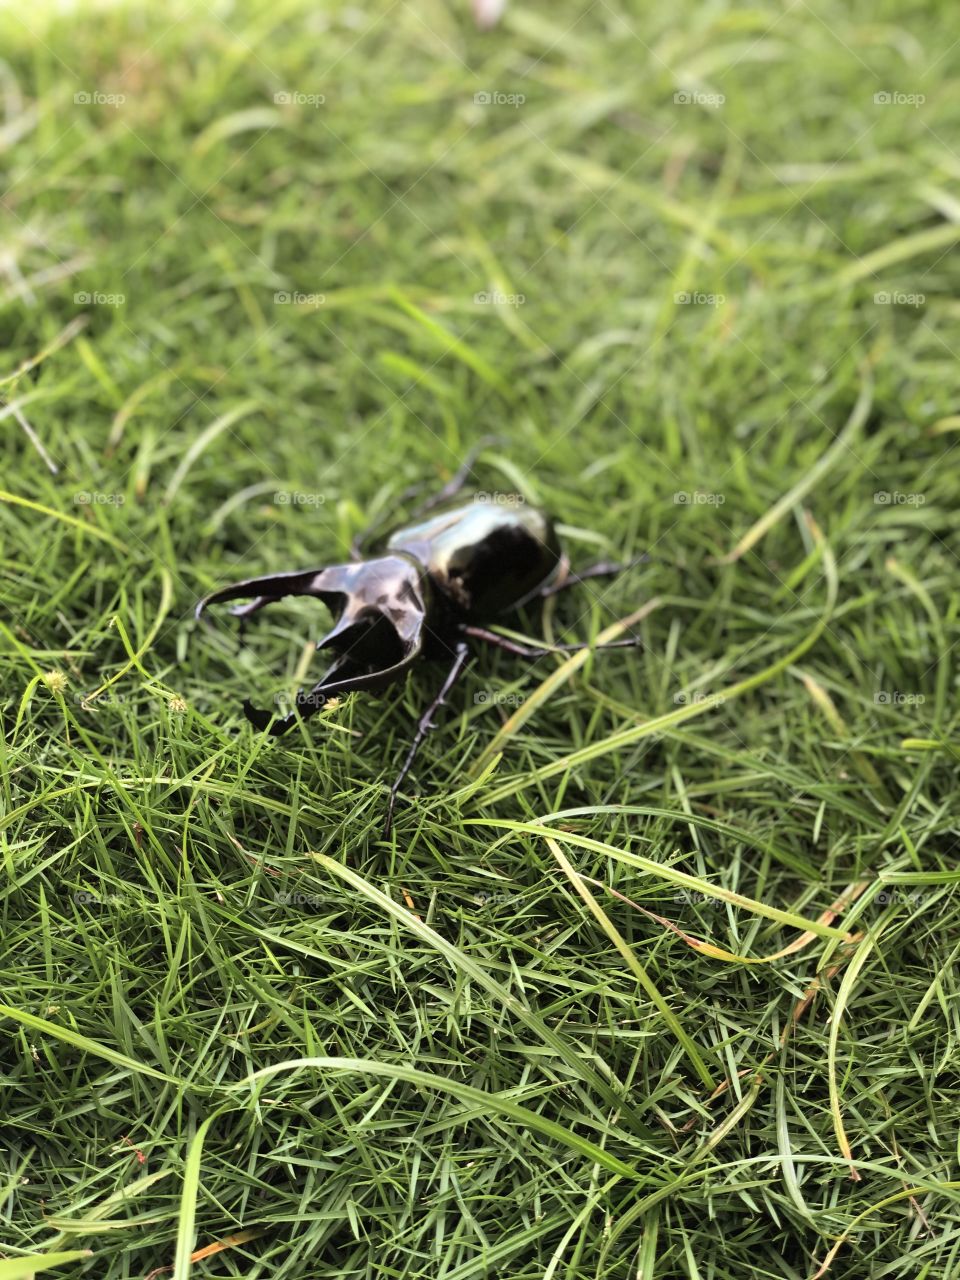 Horn beetle on the grass